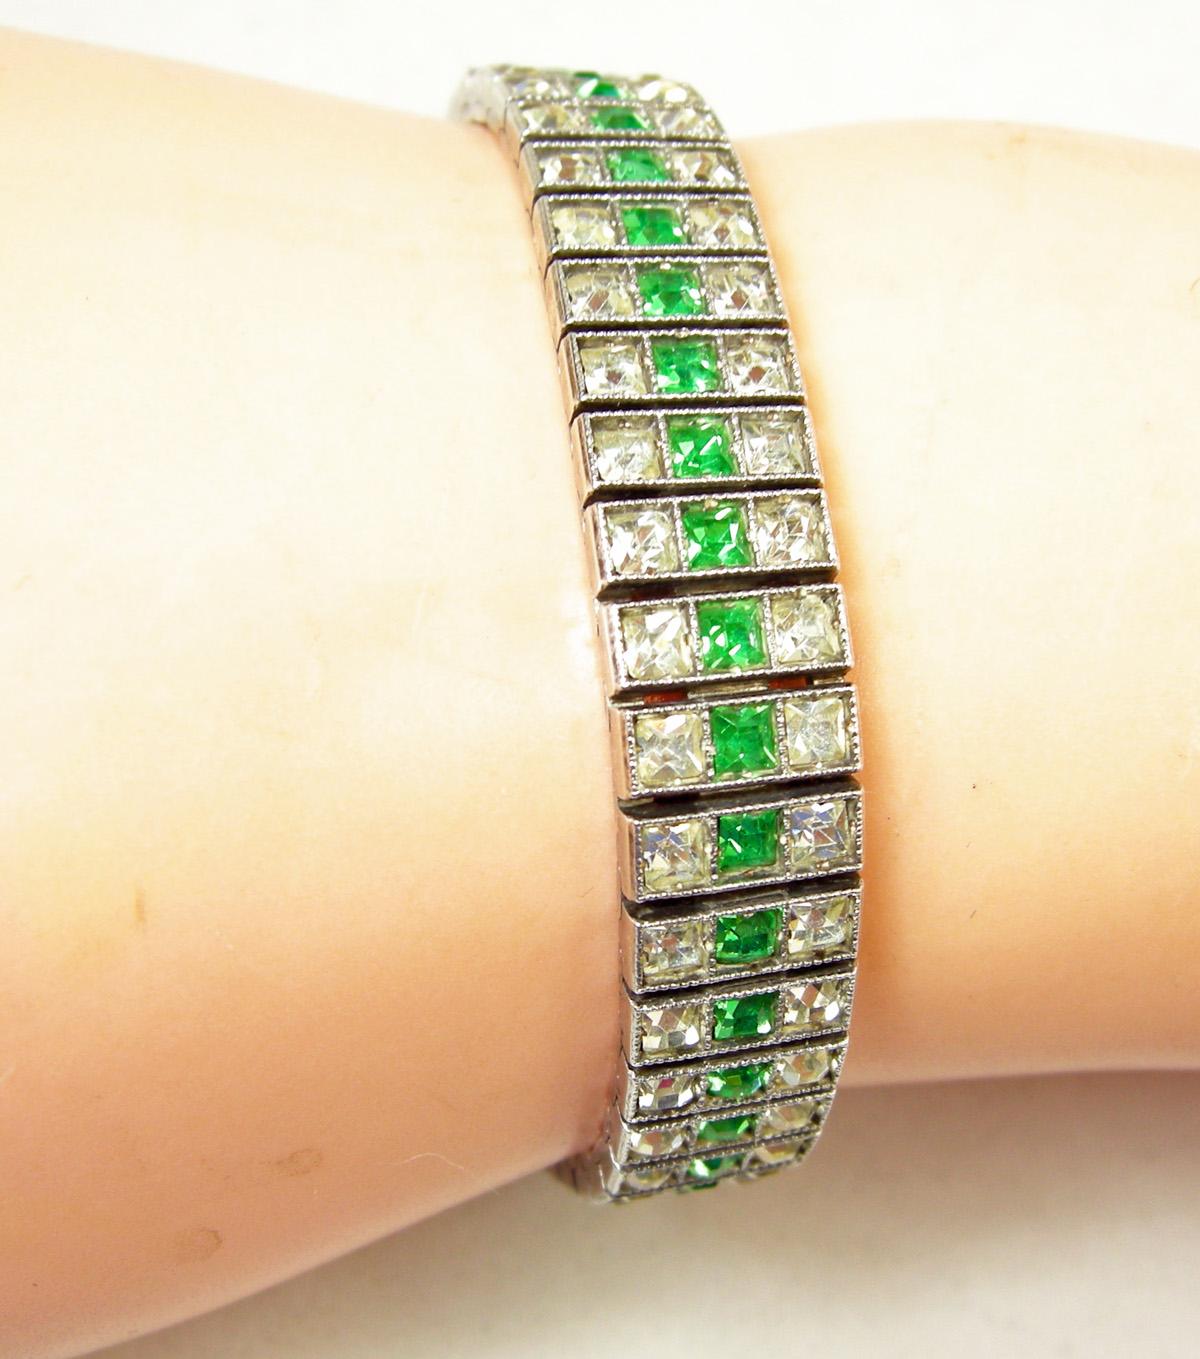 This highly collectible Deco classic channel set bracelet looks real with faux emeralds and paste. It is sterling silver with a push-in slide clasp and marked “Sterling Silver 925”.  The bracelet is 7-1/4” x 1/2